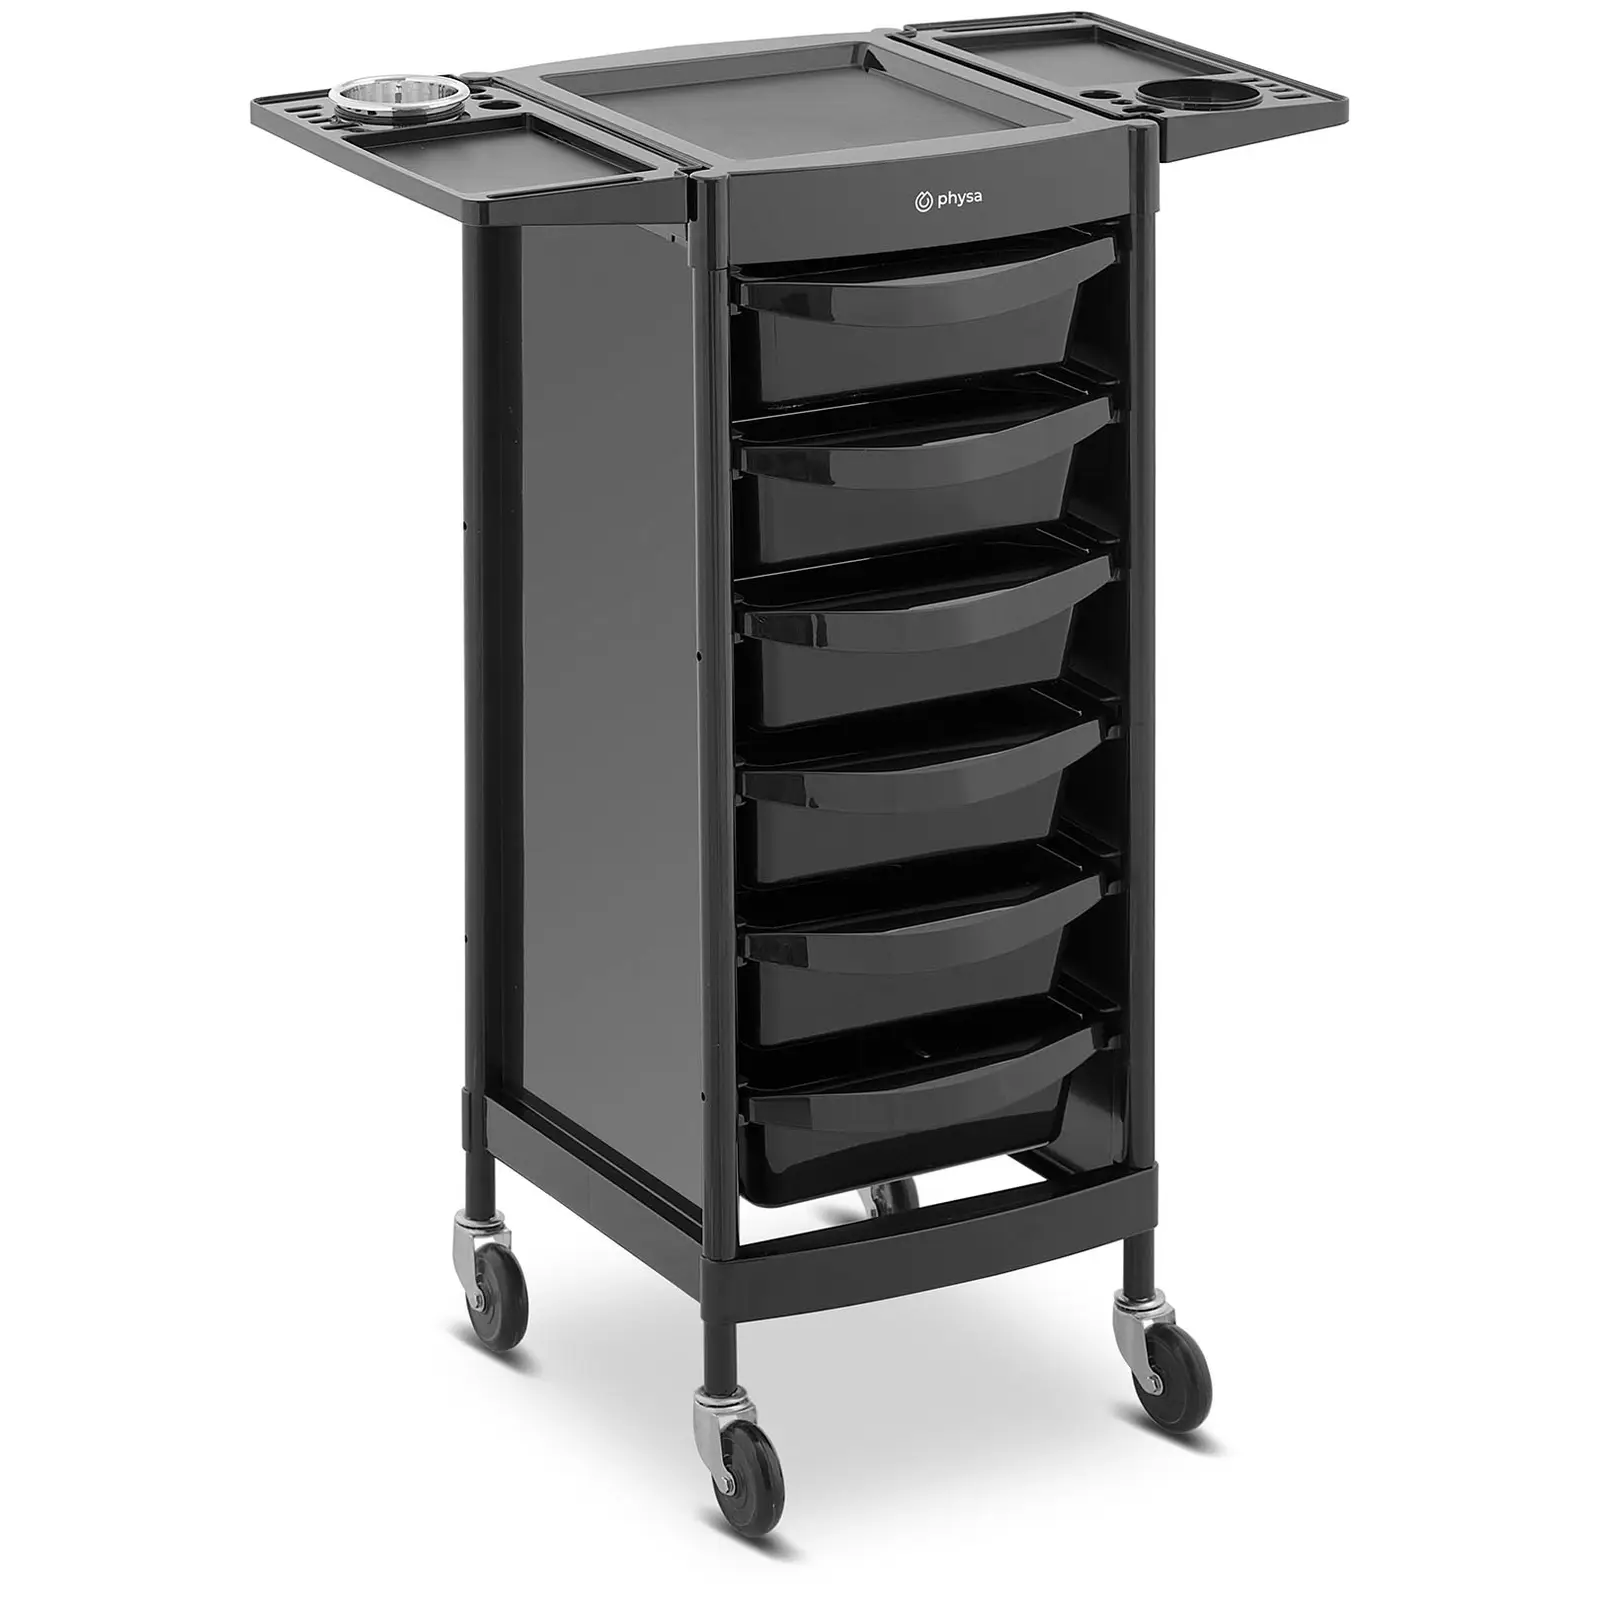 Hair Salon Trolley - 10 kg - 6 drawers with 3 dividers - hairdryer holder - 420 x 390 mm shelf